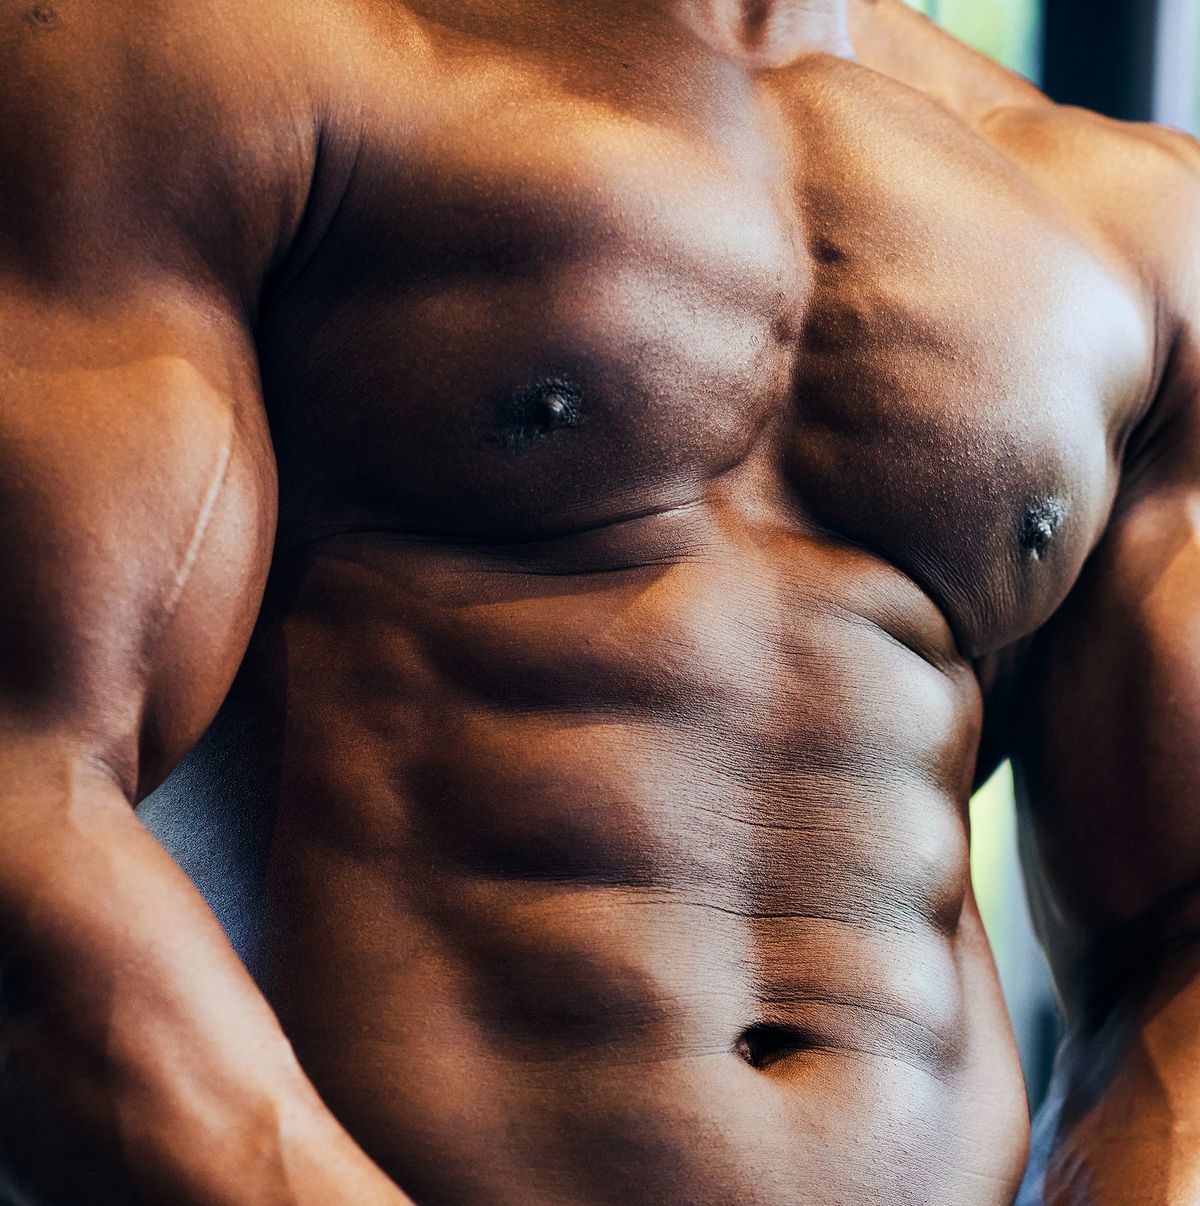 Ab Training Workout Tips for Six-Pack Success